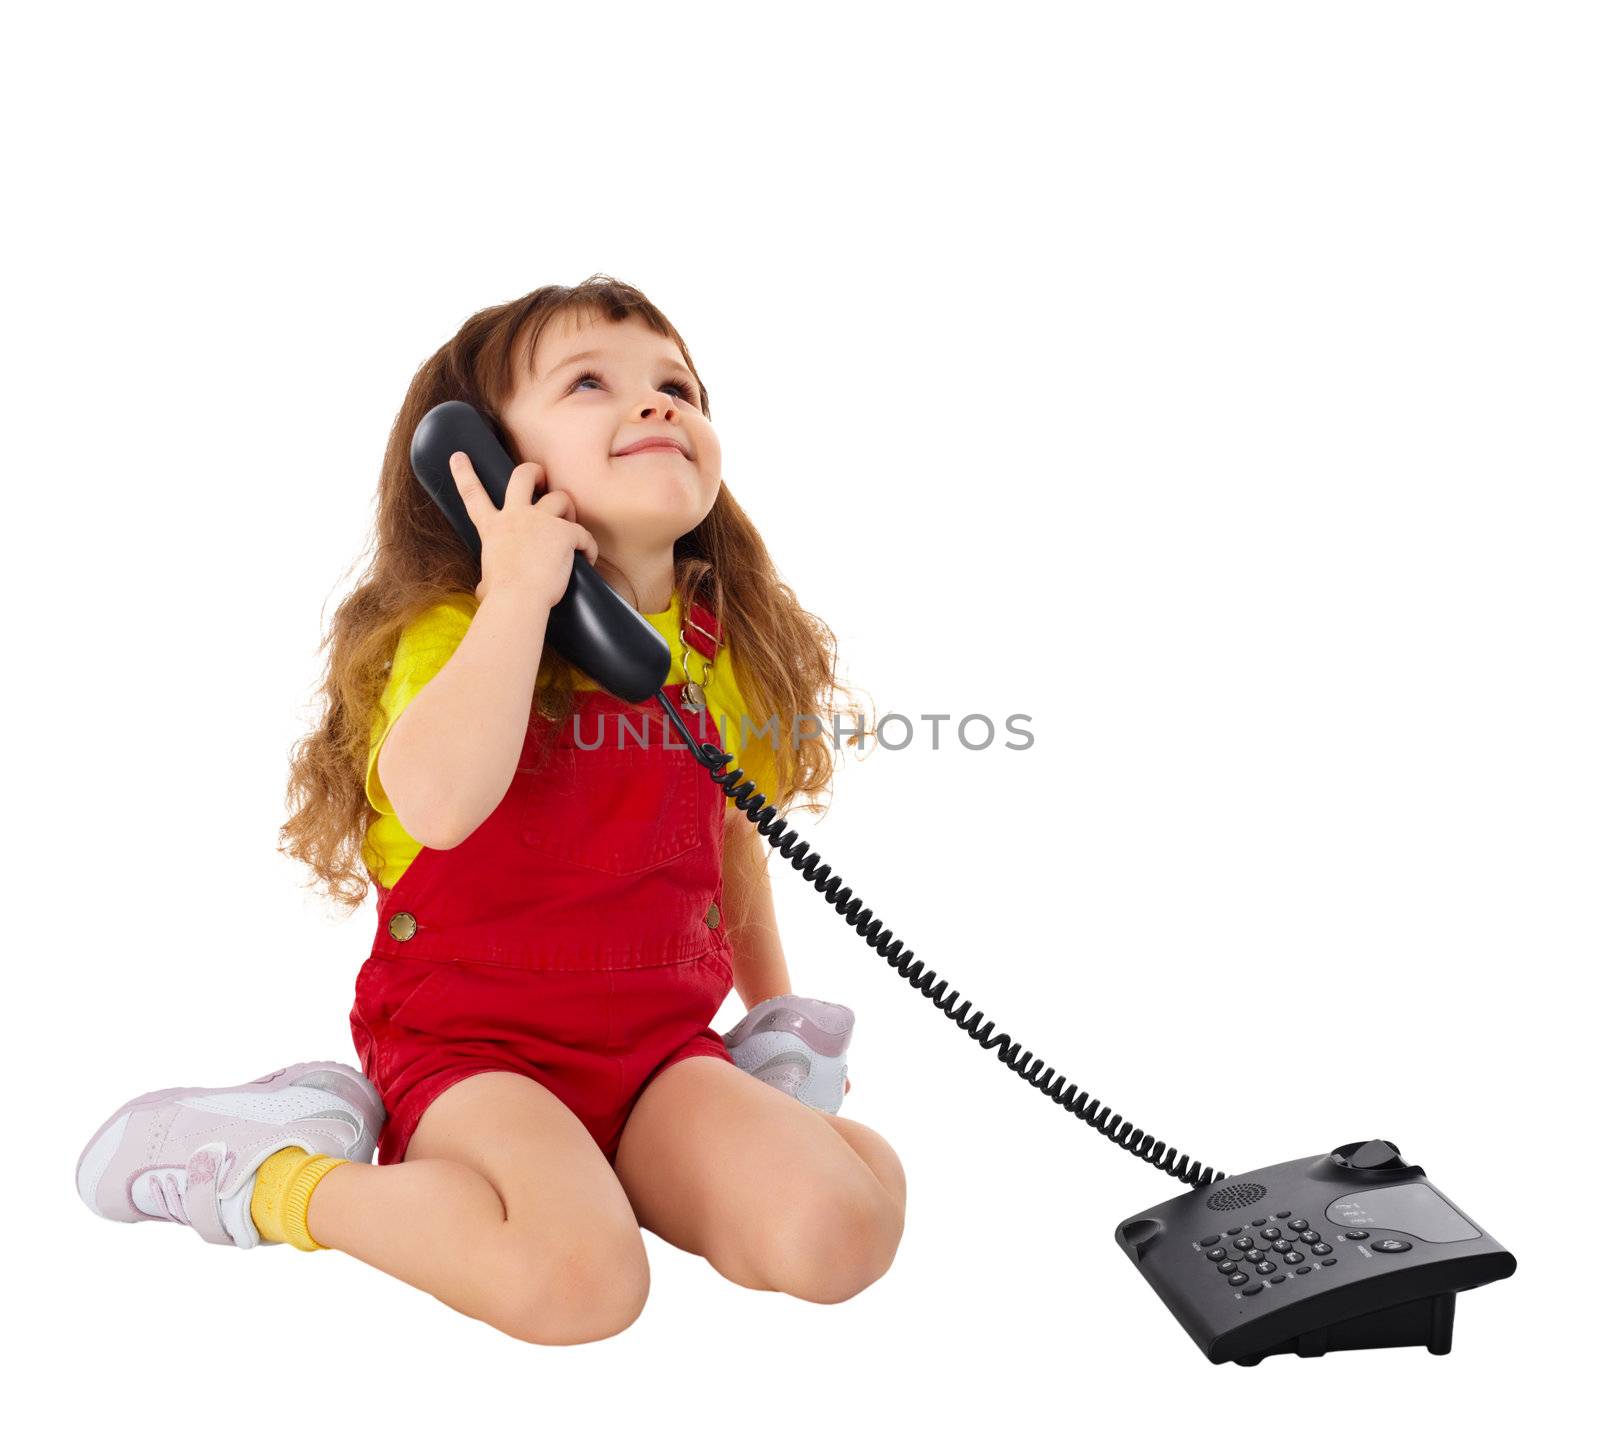 Child talking on the phone isolated on white background